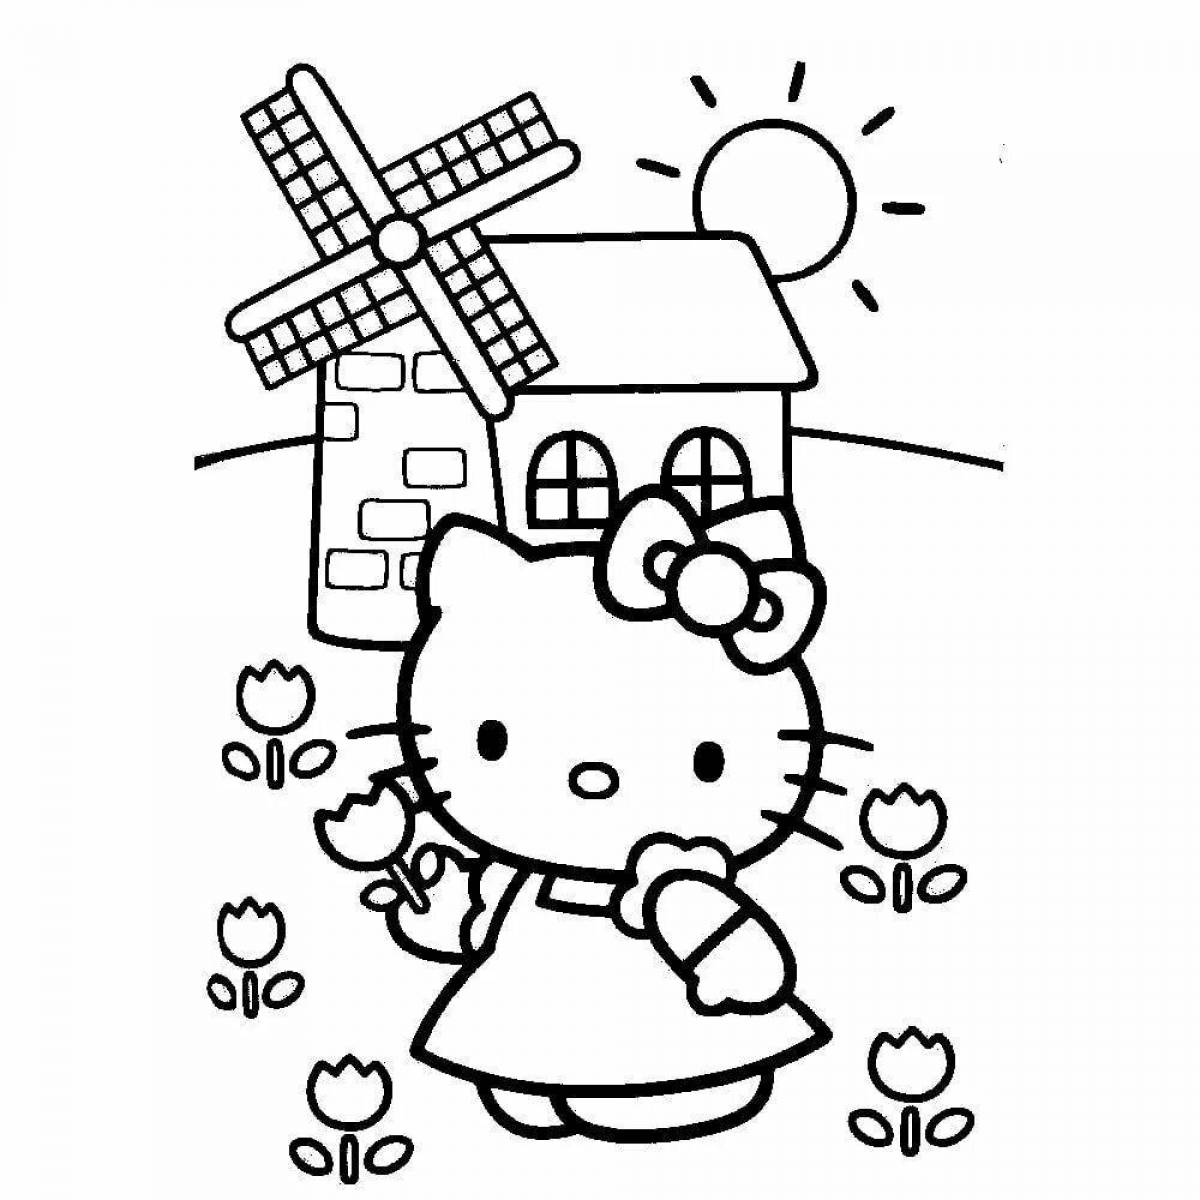 Astro kitty expressive coloring book